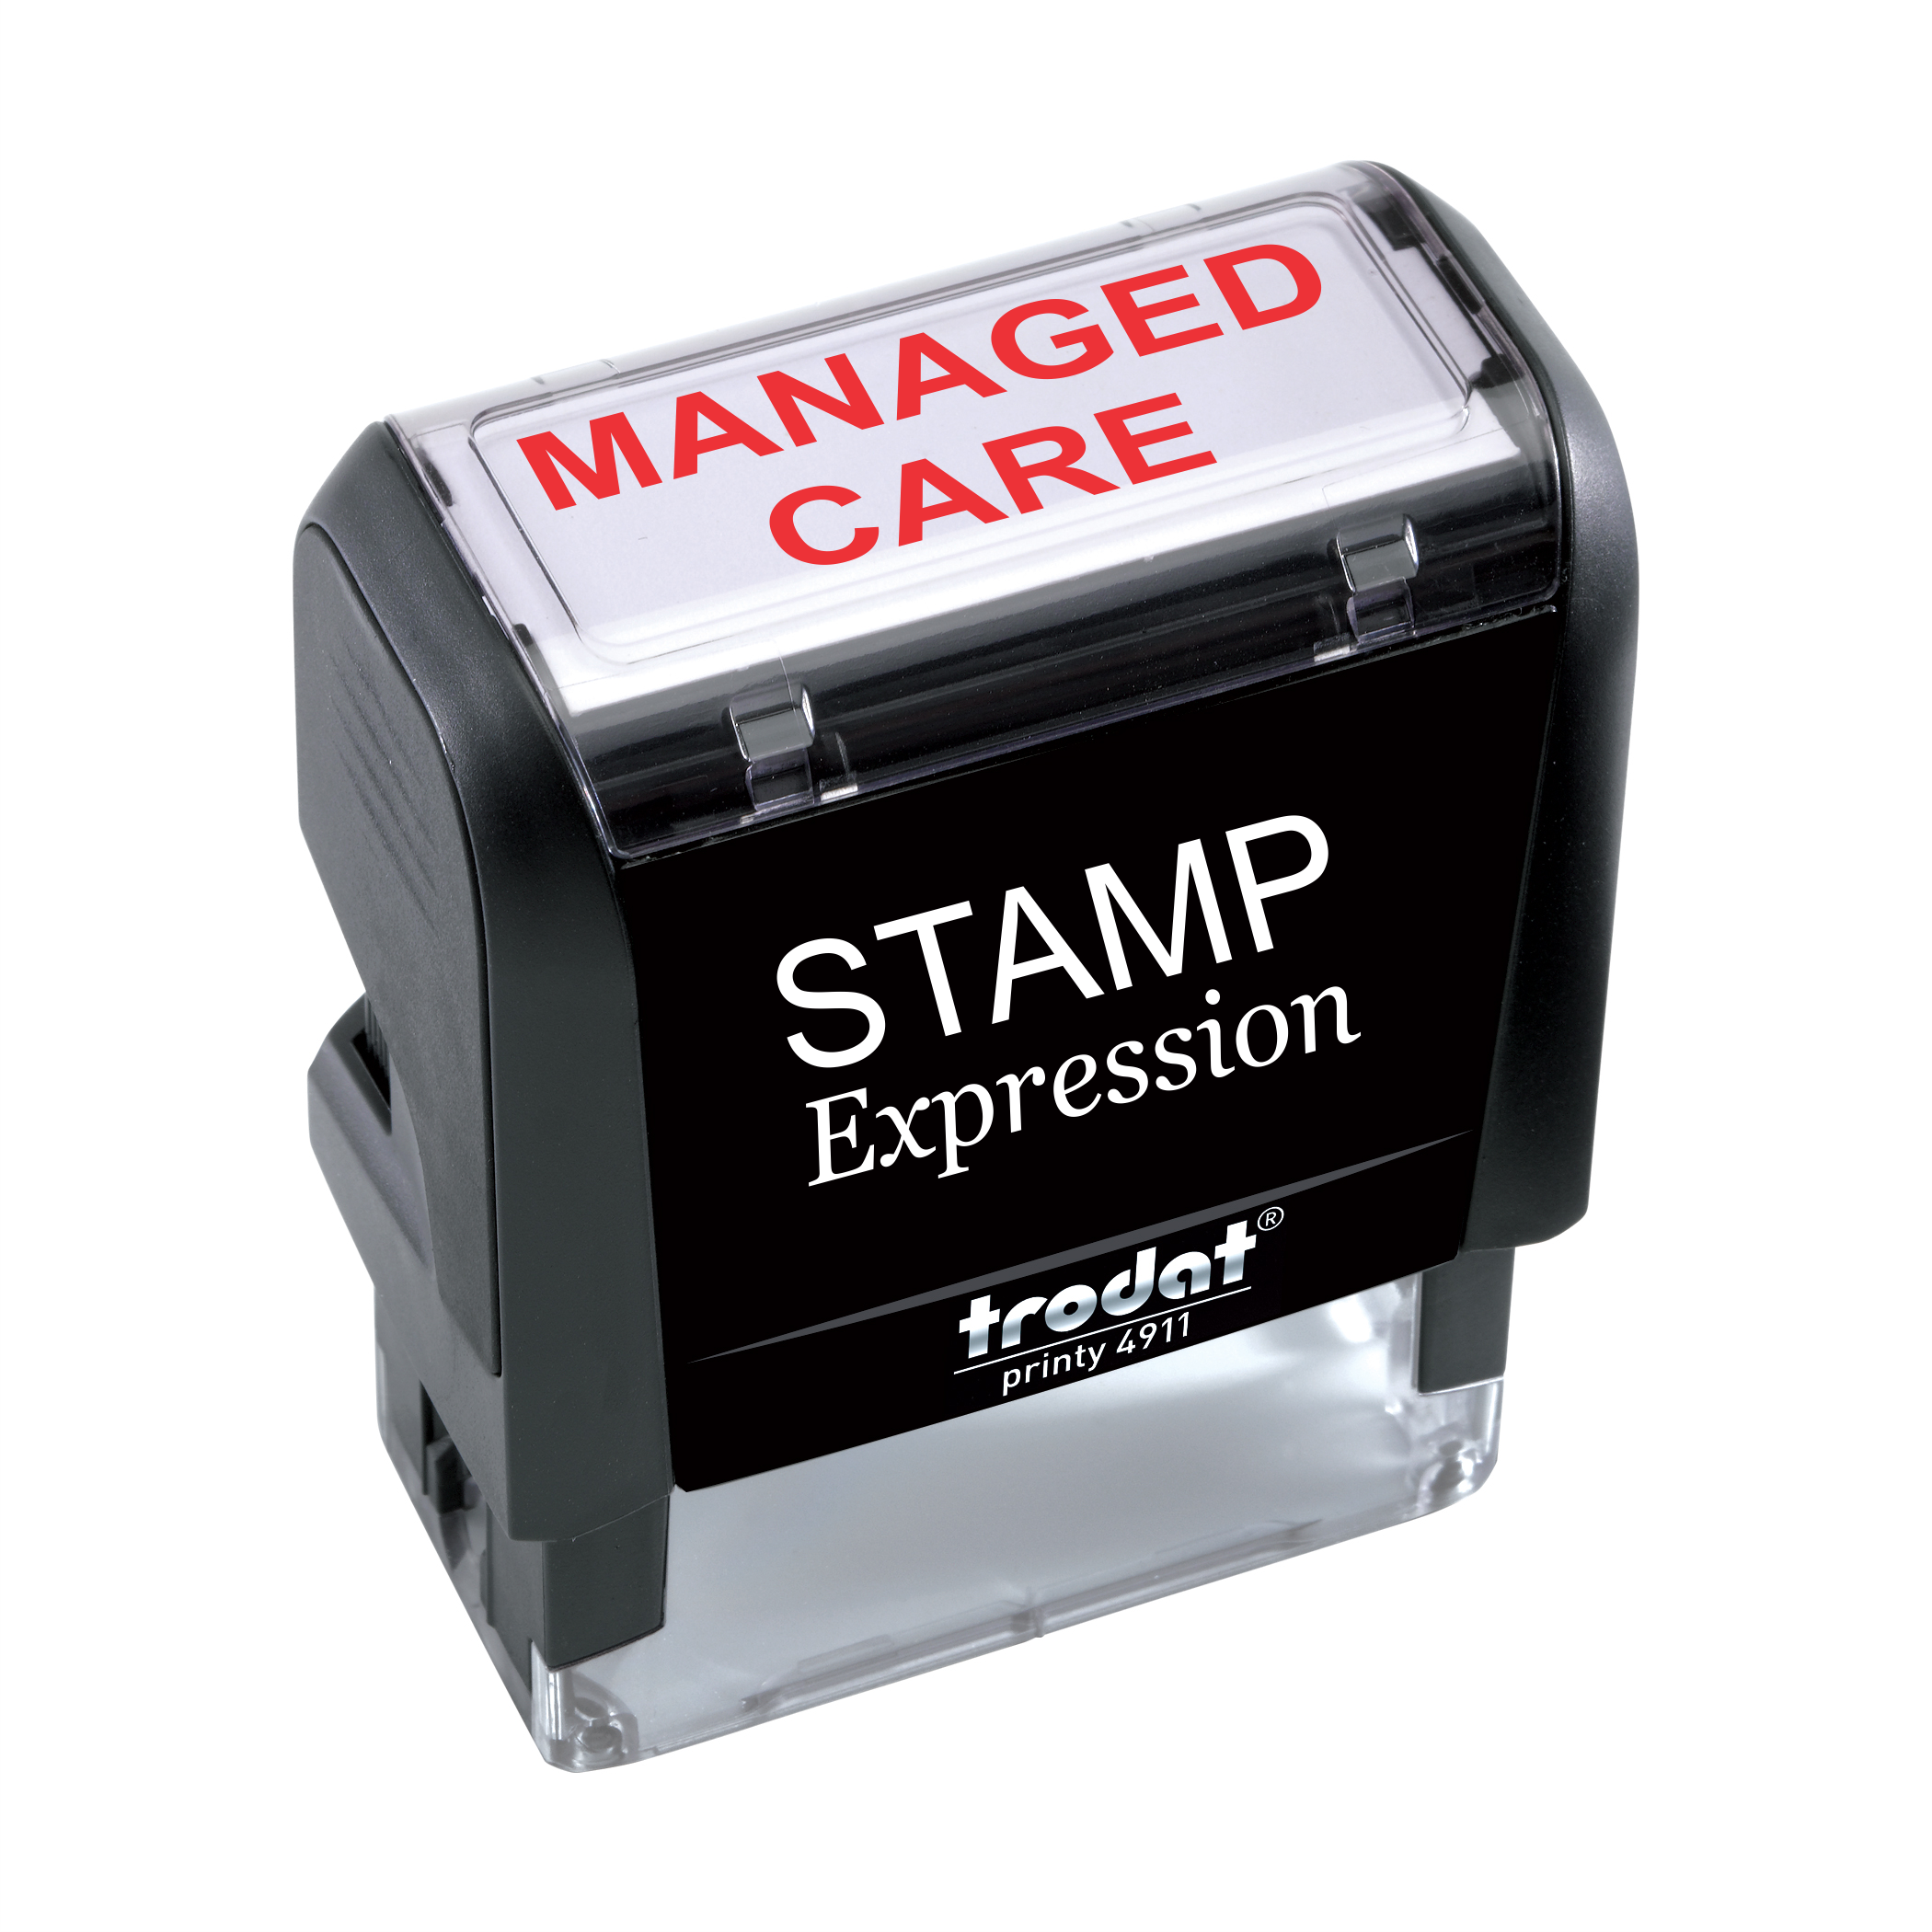 Managed Care Medical Self Inking Rubber Stamp